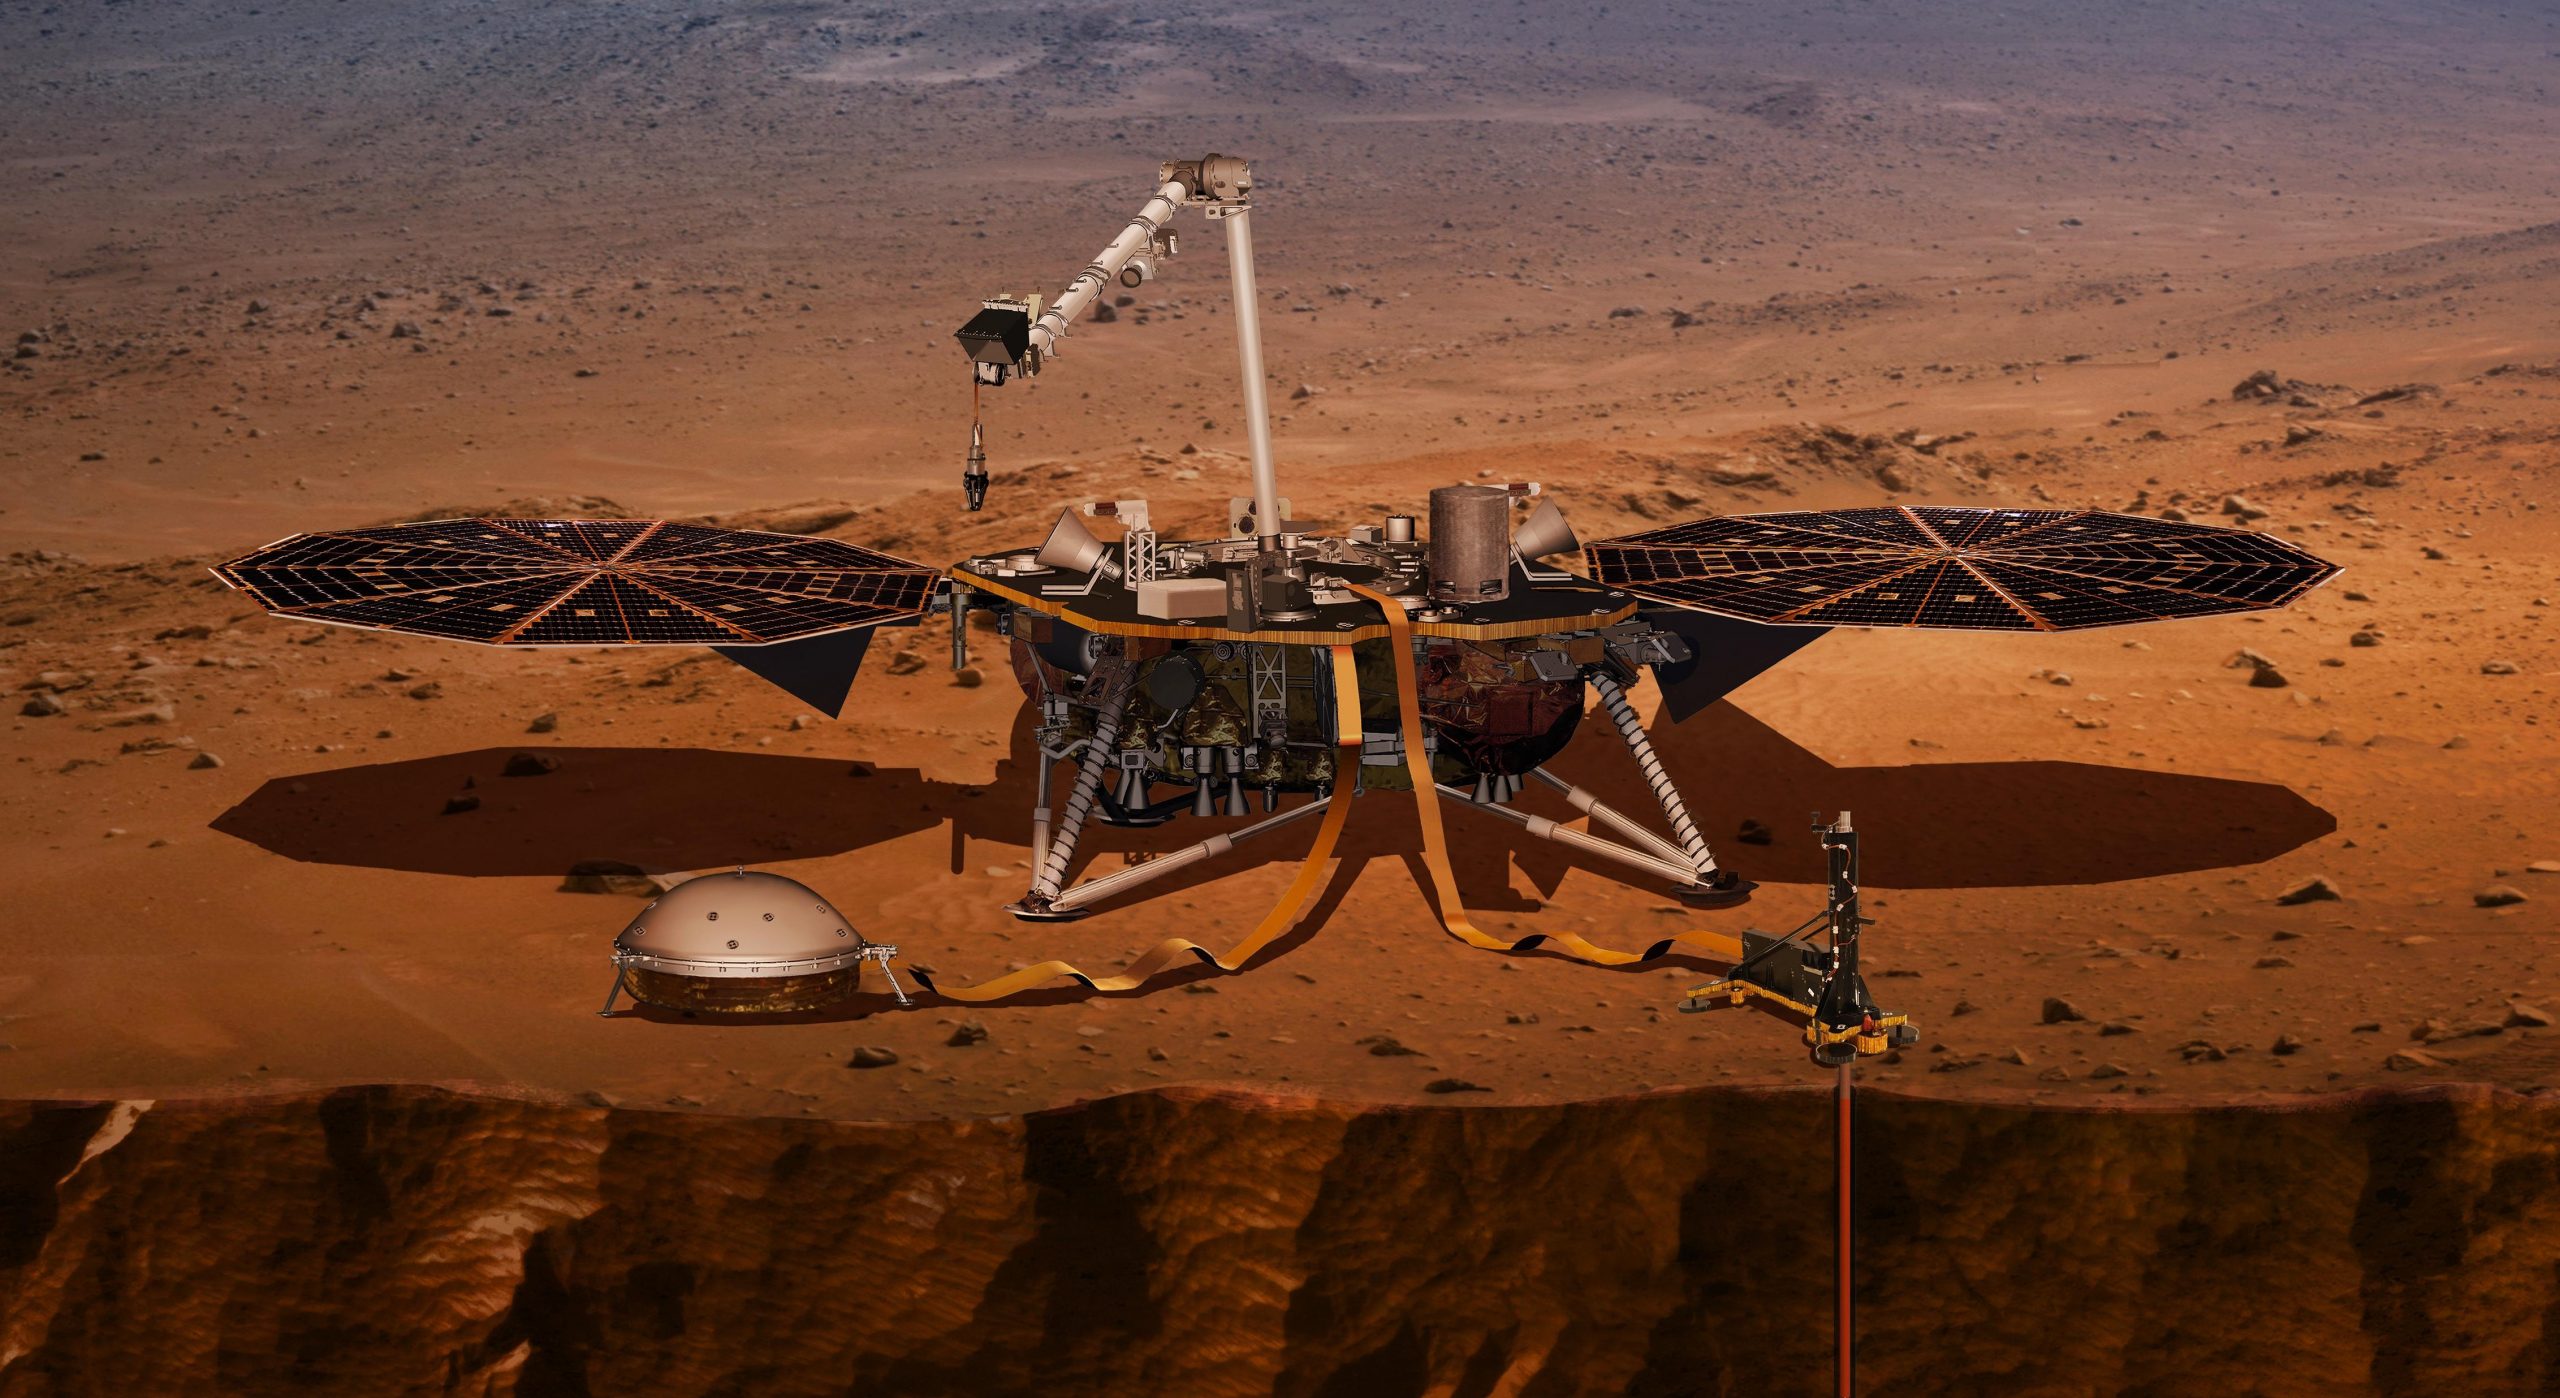 InSight recorded the most powerful marsquake to date. Credit: NASA/JPL-Caltech